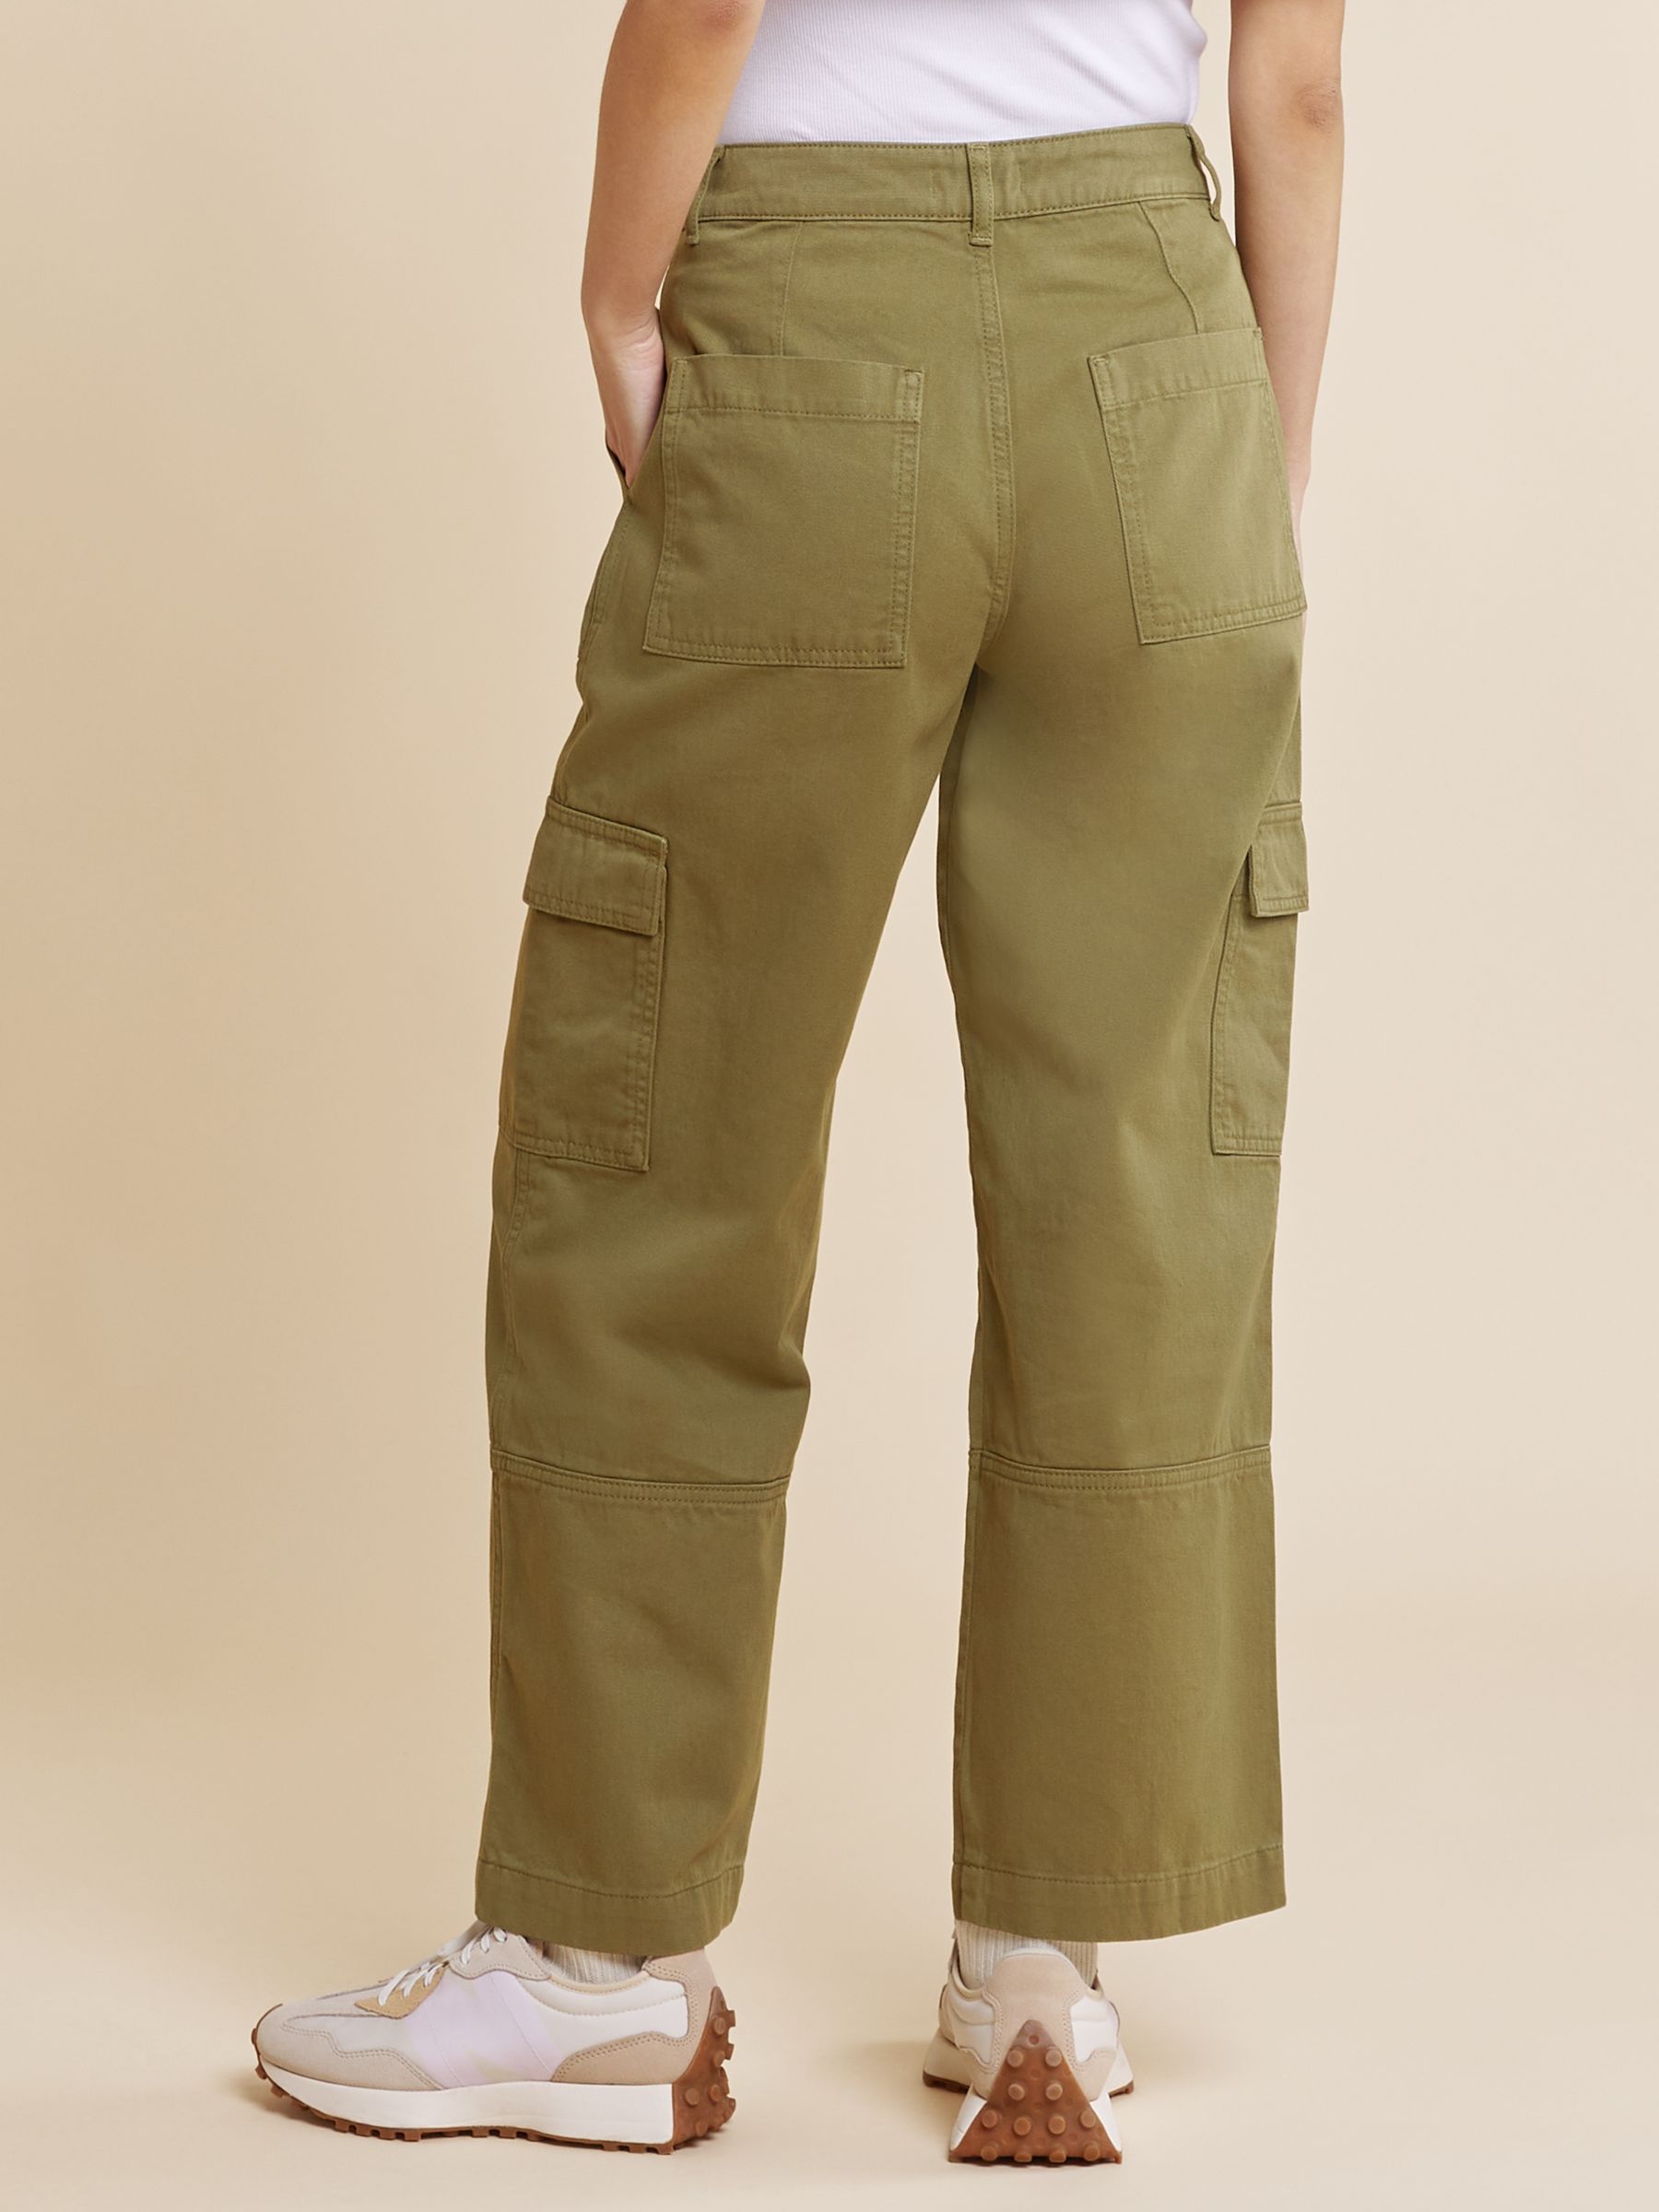 Albaray Military Pocket Organic Cotton Trousers, Olive at John Lewis ...